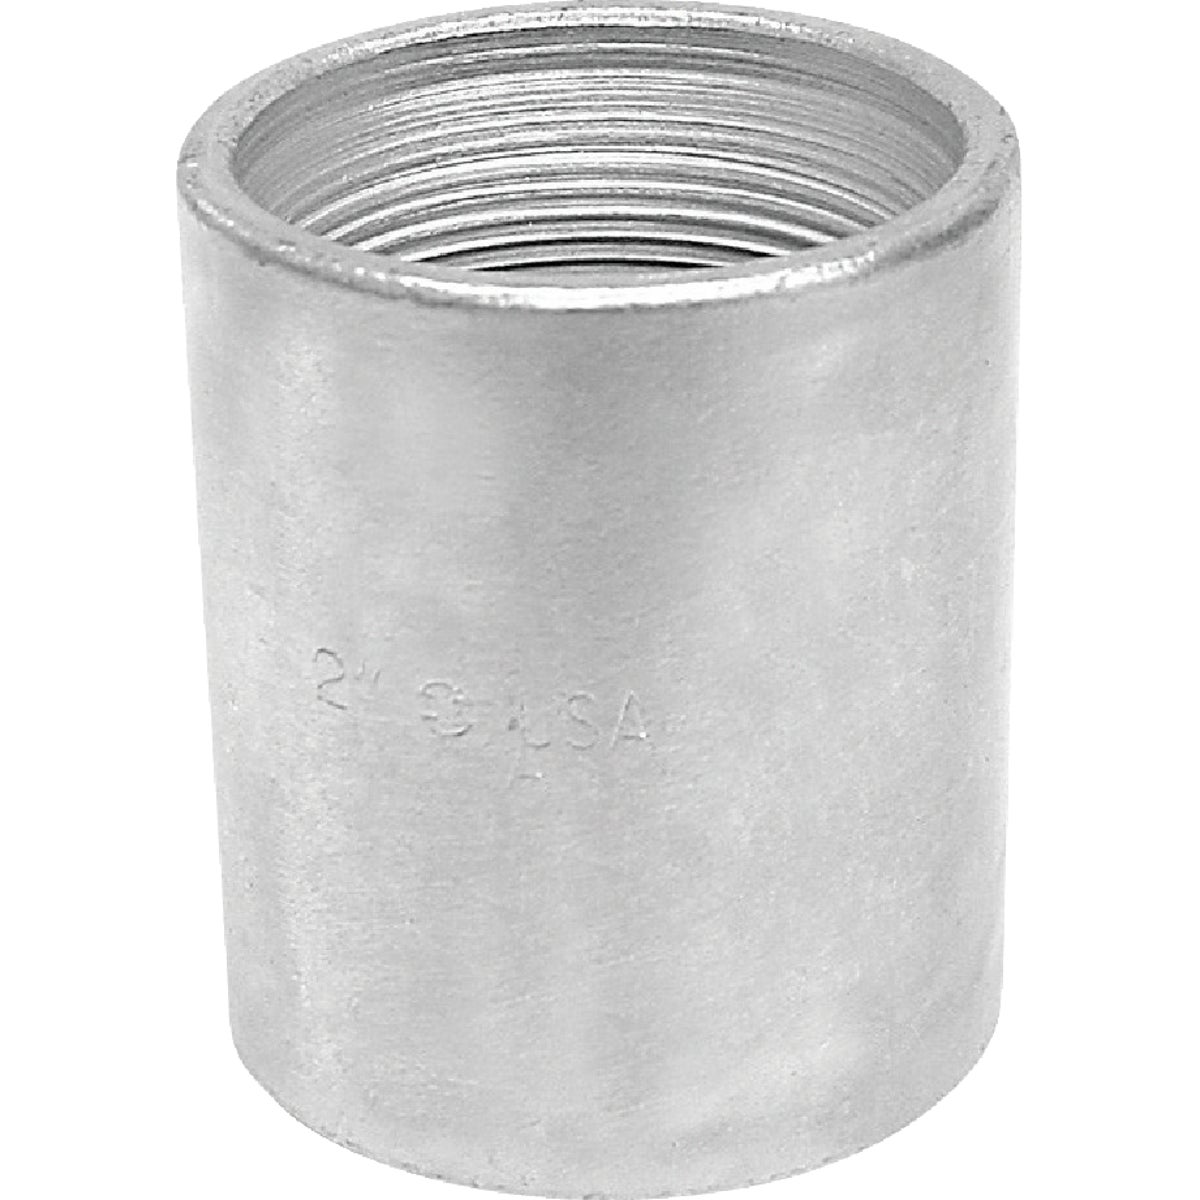 Southland 1/8 In. x 1/8 In. FPT Standard Merchant Galvanized Coupling